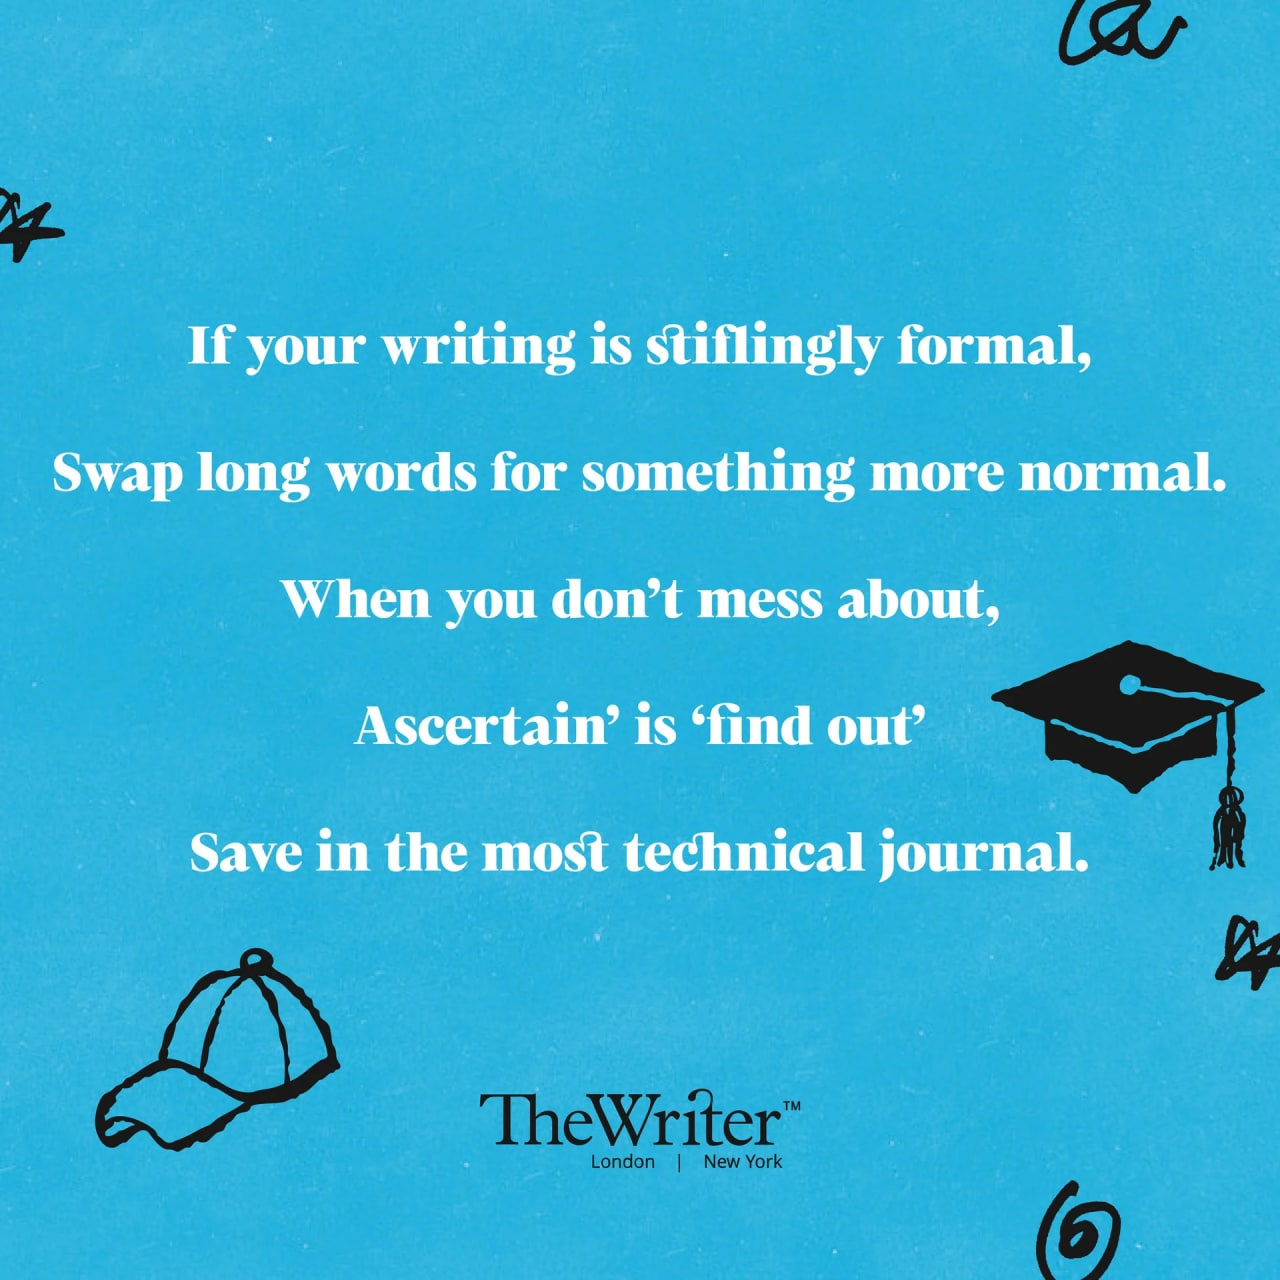 If your writing is stiflingly formal, Slap long words for something more normal. When you don’t mess about, Ascertain’ is ‘find out’ Save in the most technical journal.